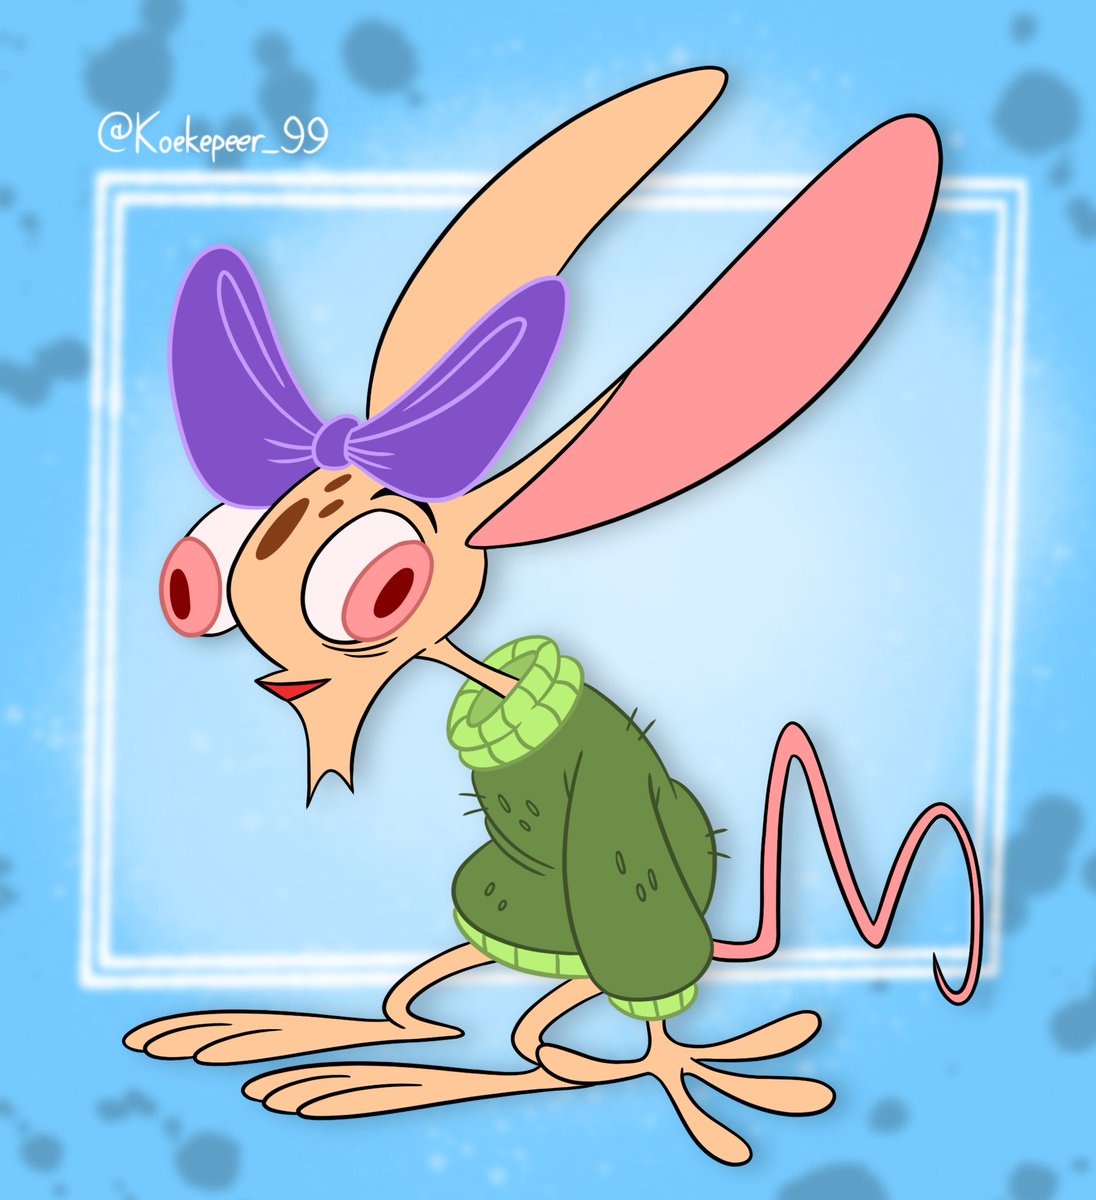 Ren wearing a sweater and headbow
#renandstimpy #nickelodeon #spumco